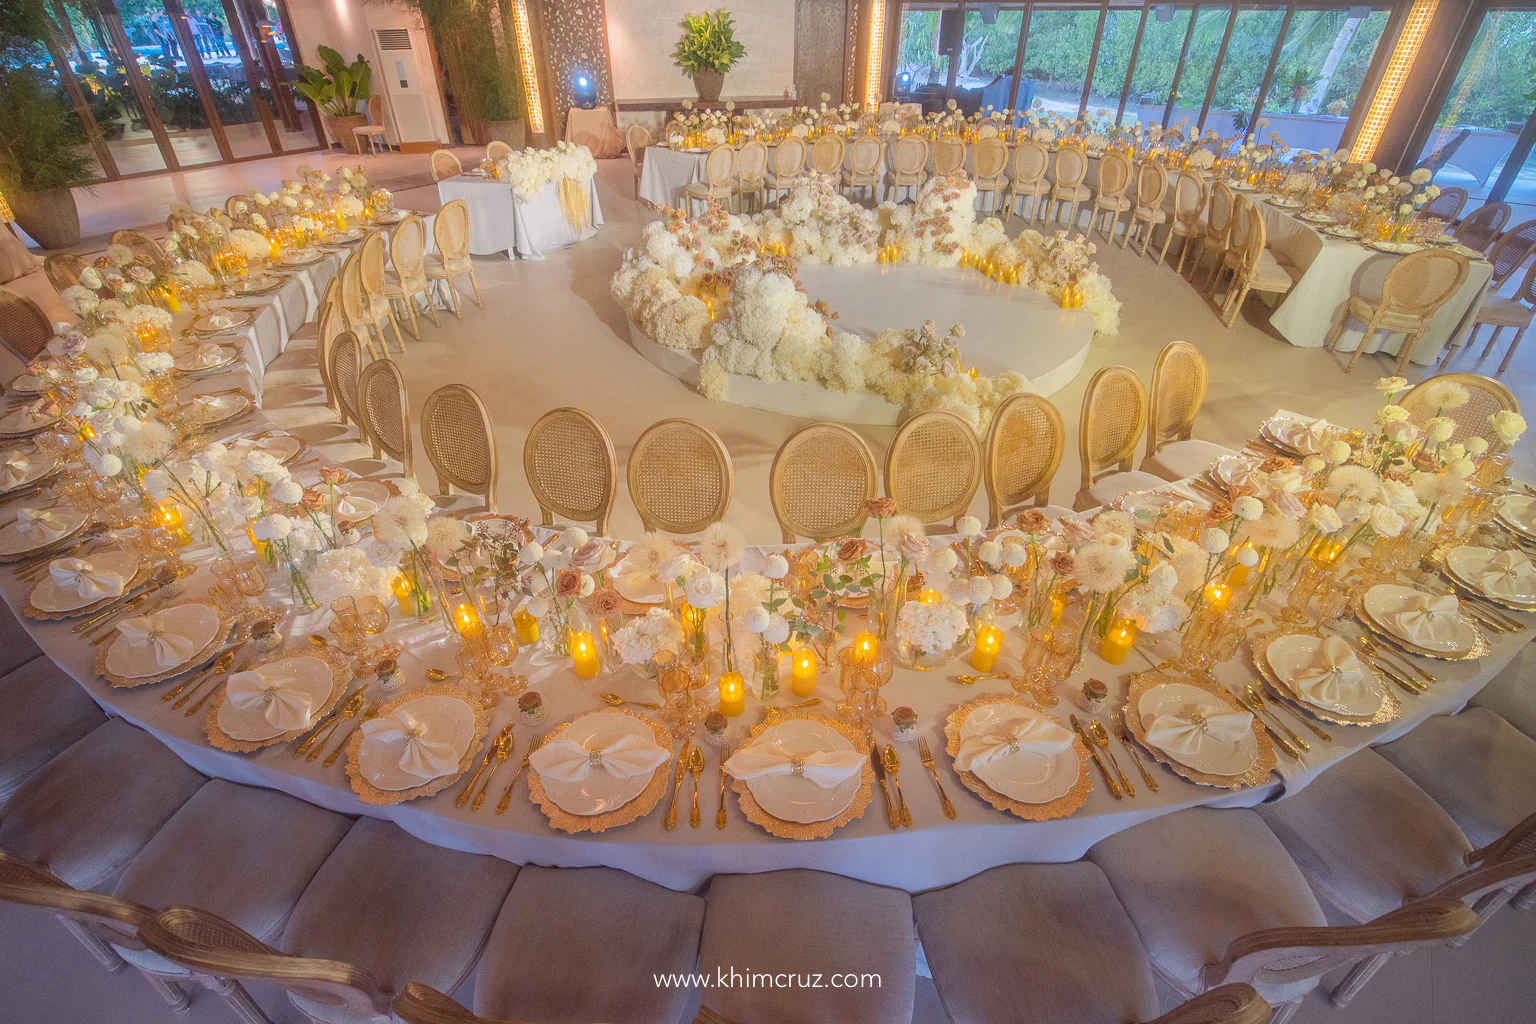 warm glow of candles on circular wedding reception table with beautifully arranged flowers